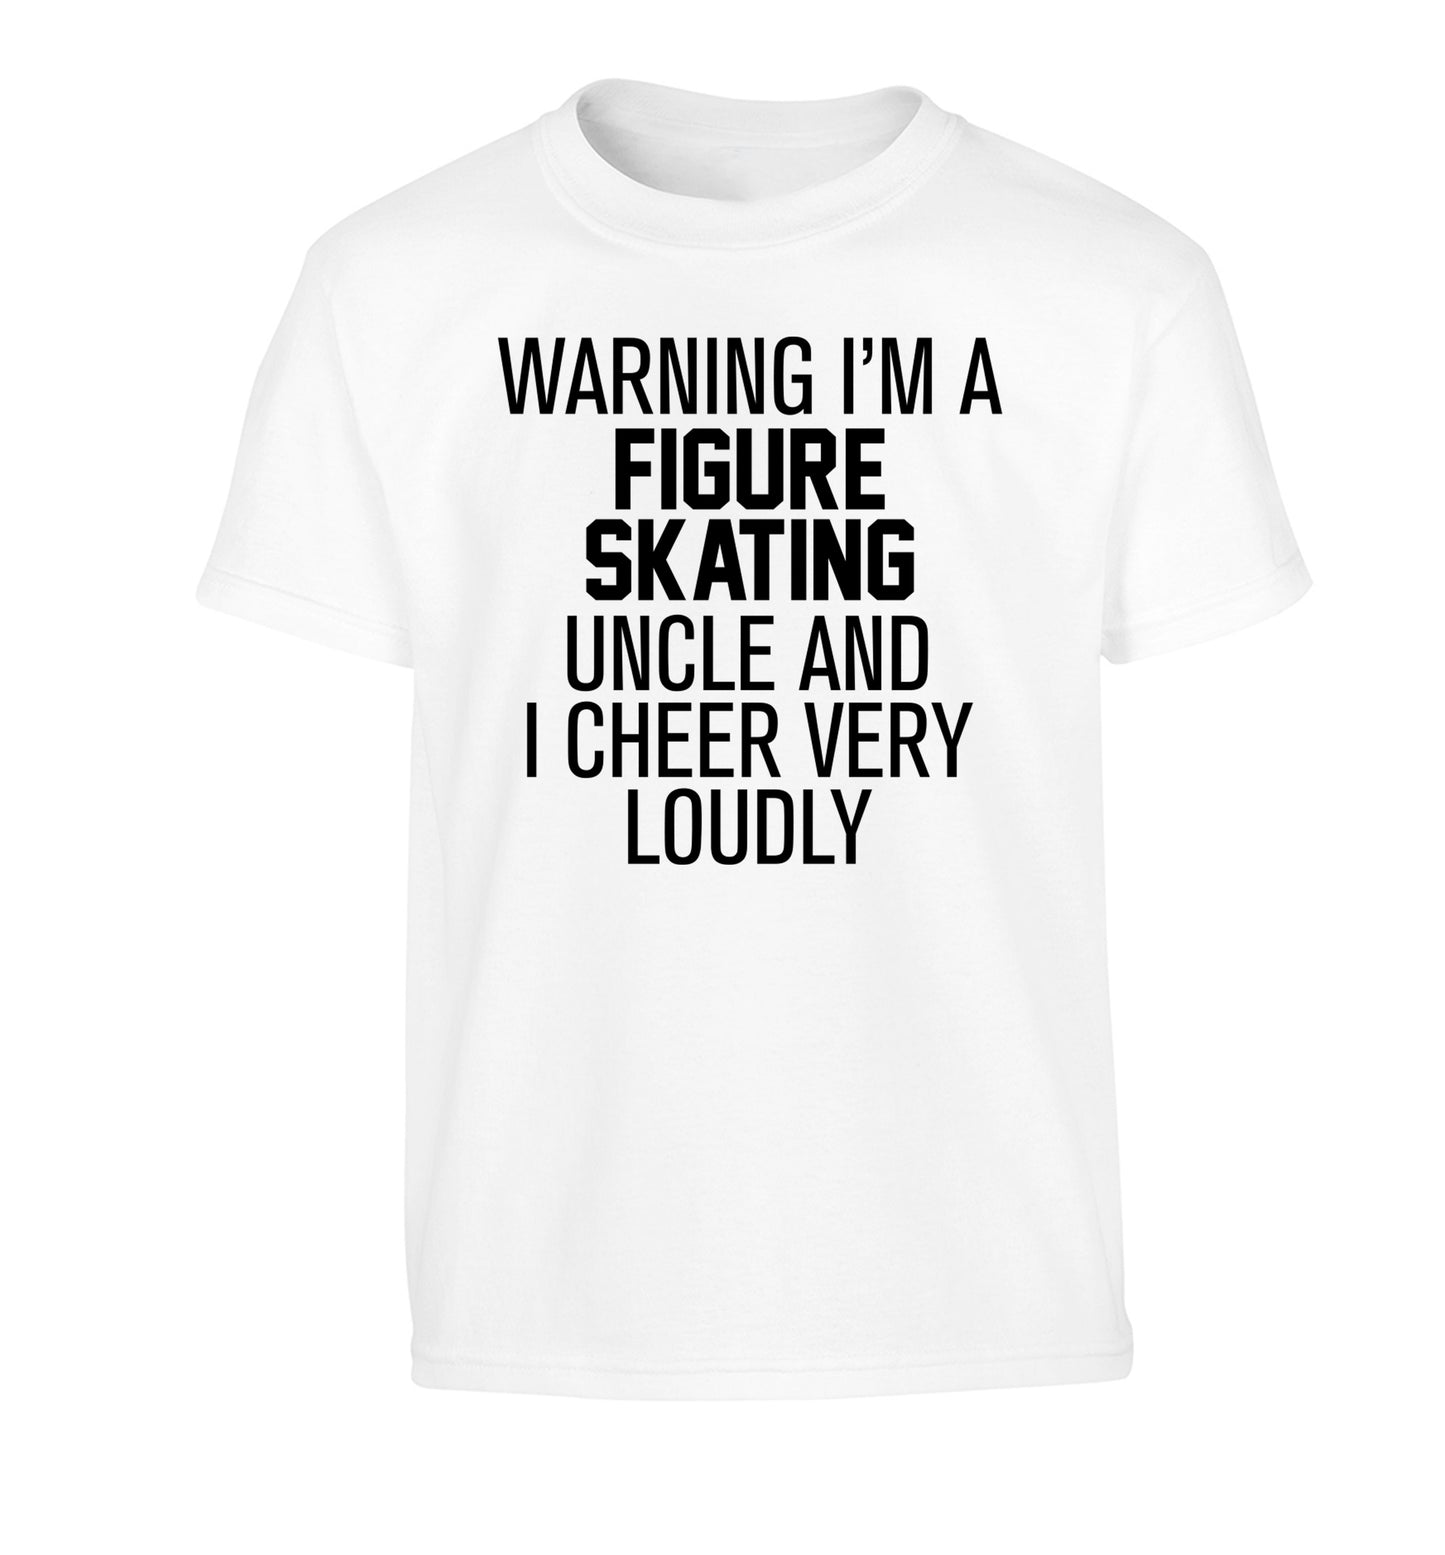 Warning I'm a figure skating uncle and I cheer very loudly Children's white Tshirt 12-14 Years